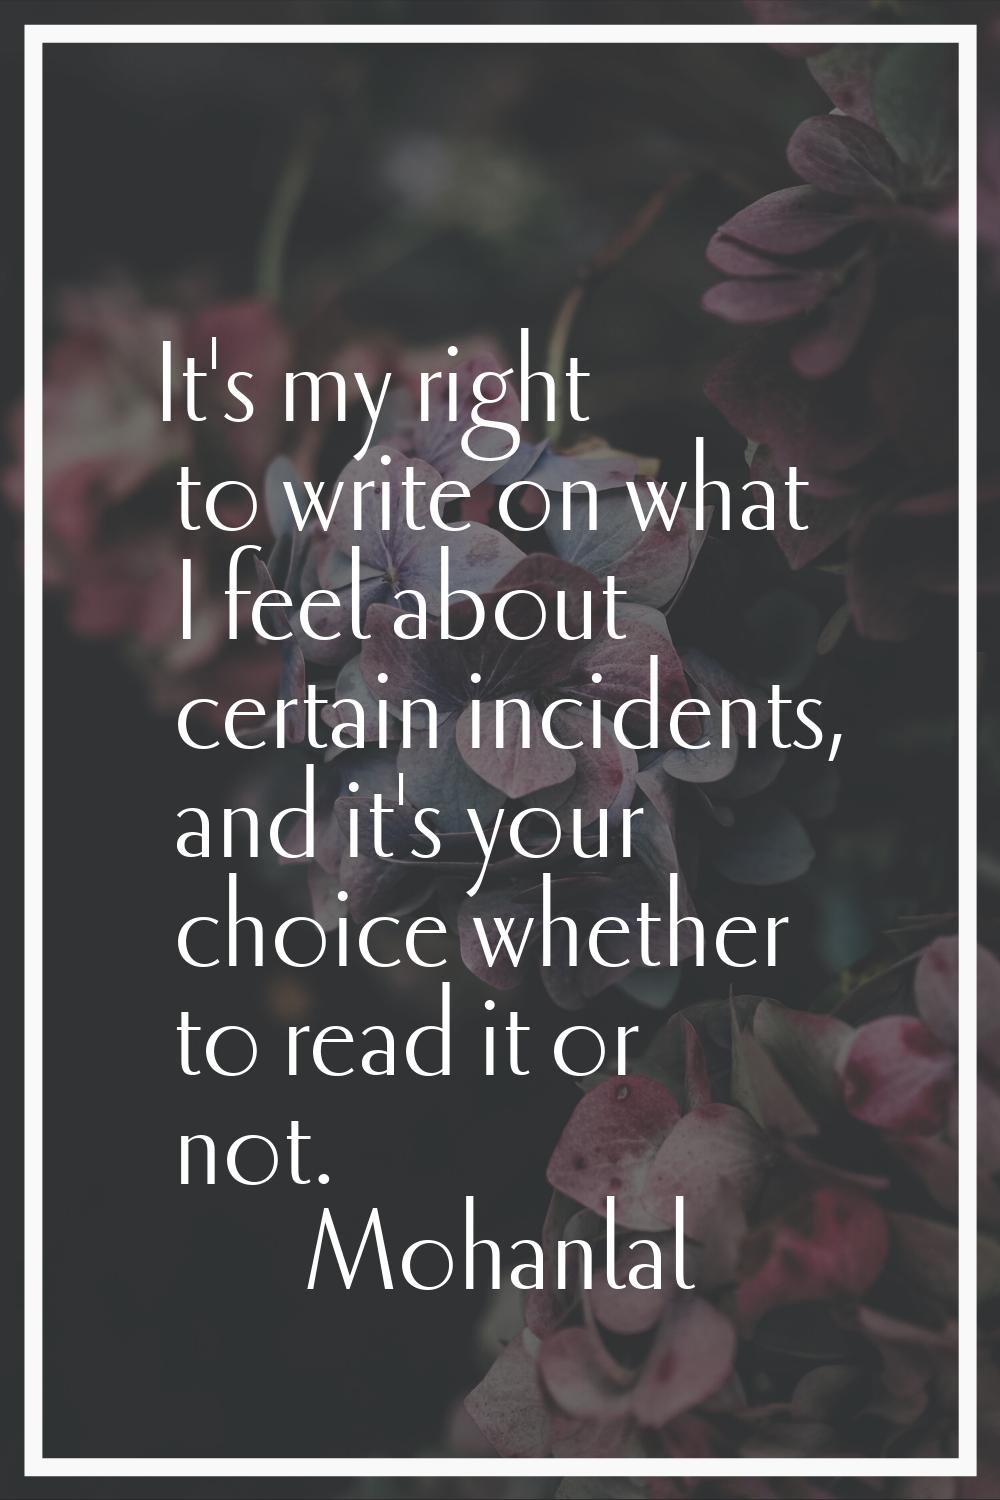 It's my right to write on what I feel about certain incidents, and it's your choice whether to read